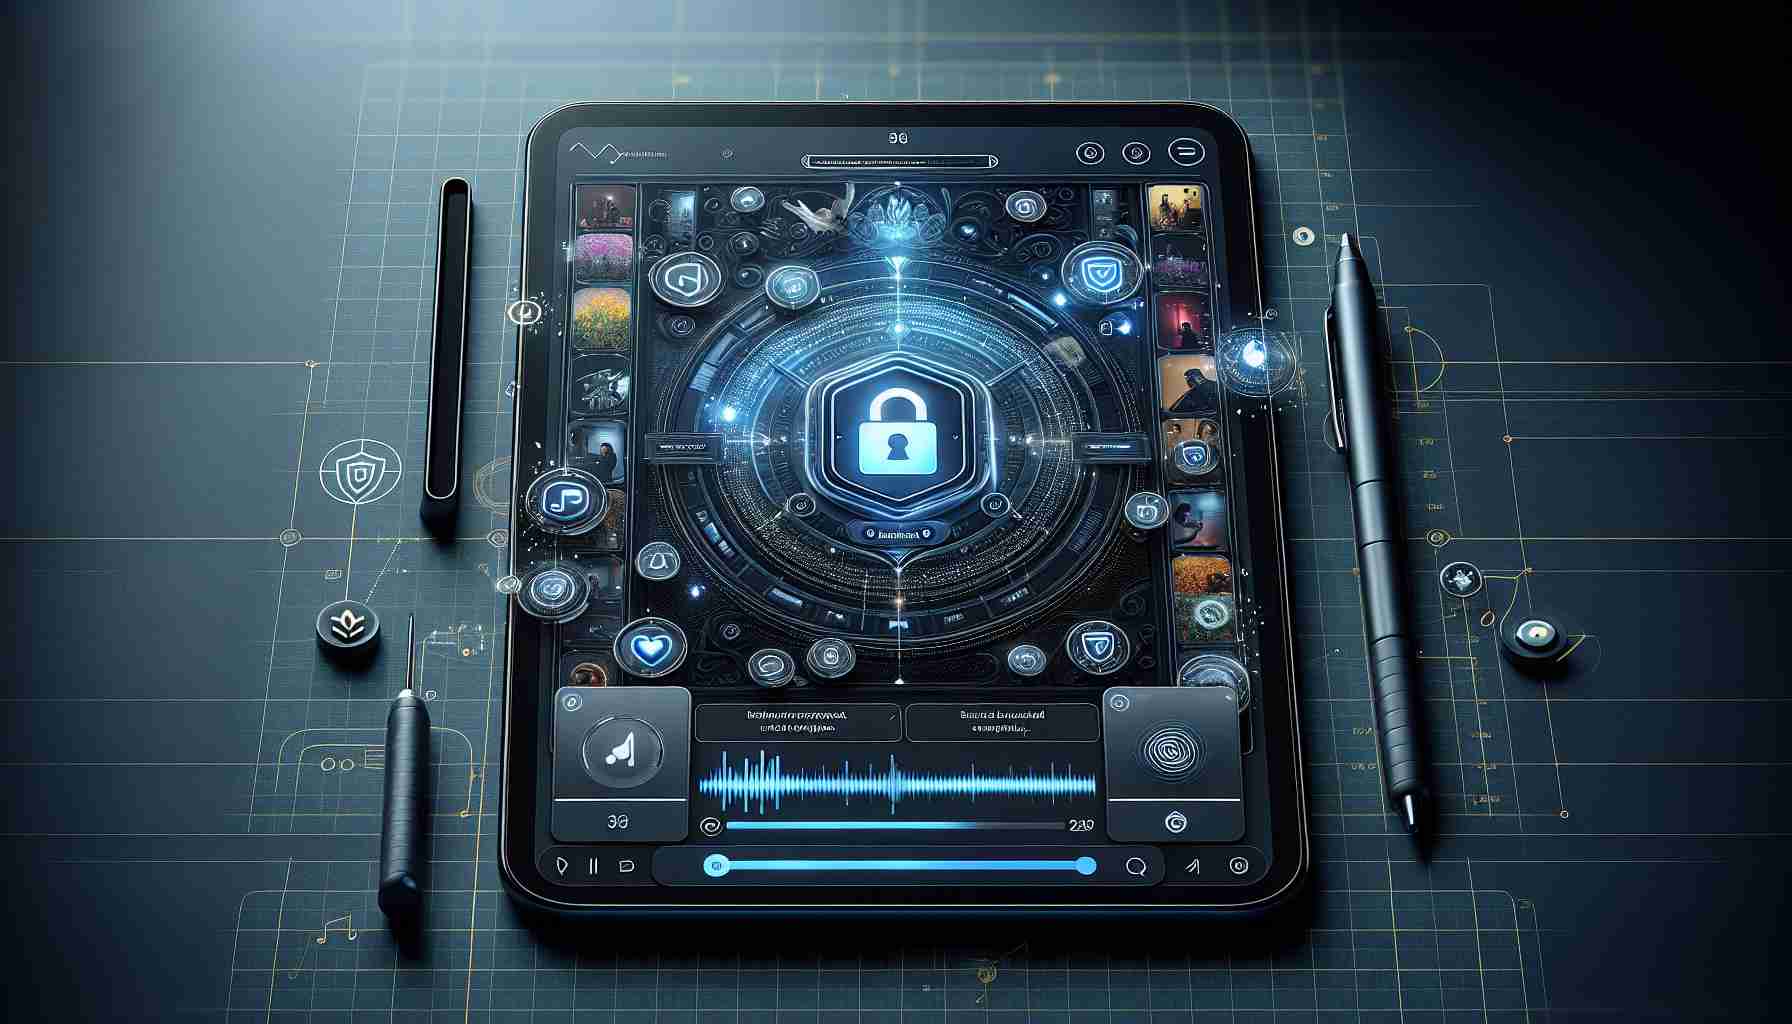 Create a high-definition, realistic image that showcases a digital music streaming platform introducing an enhanced security feature. The frame should include a close-up view of a devices screen displaying an interface of the digital music streaming platform with the newly integrated security feature prominently highlighted. Add subtle visual elements emphasizing safety and protection.